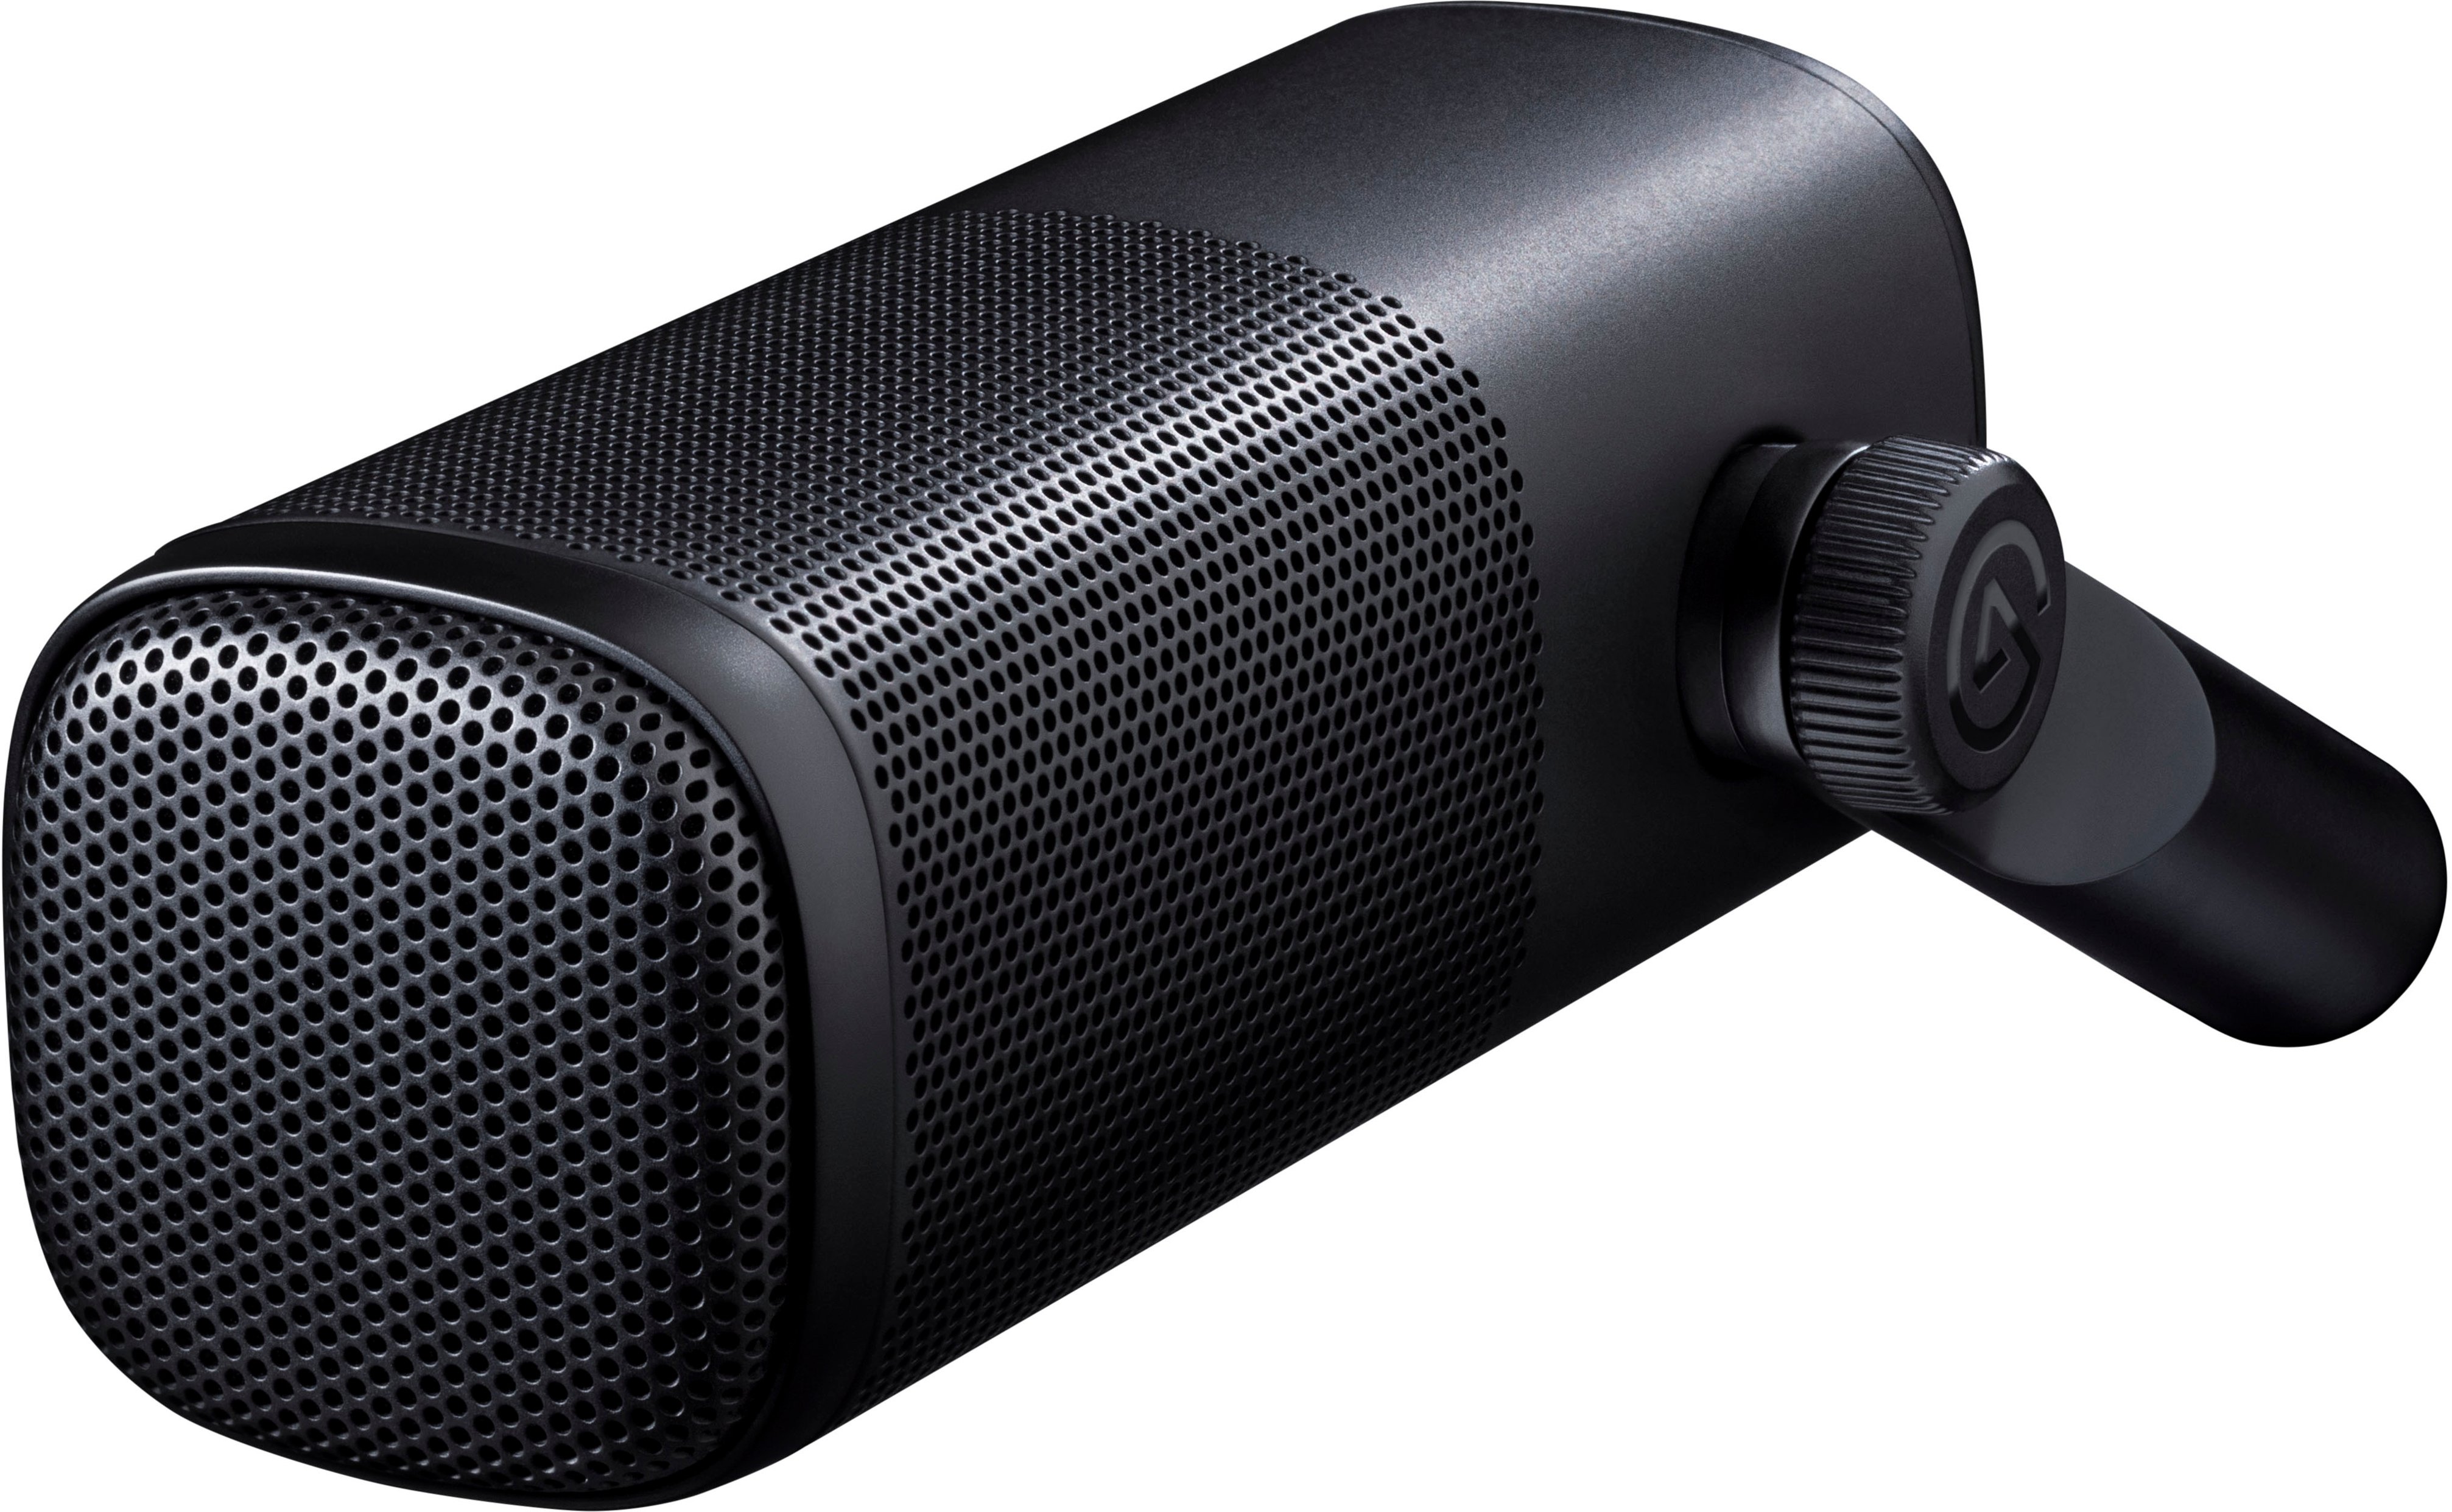 Elgato Launches Wave DX Dynamic Microphone Designed in Cooperation with  Lewitt Audio